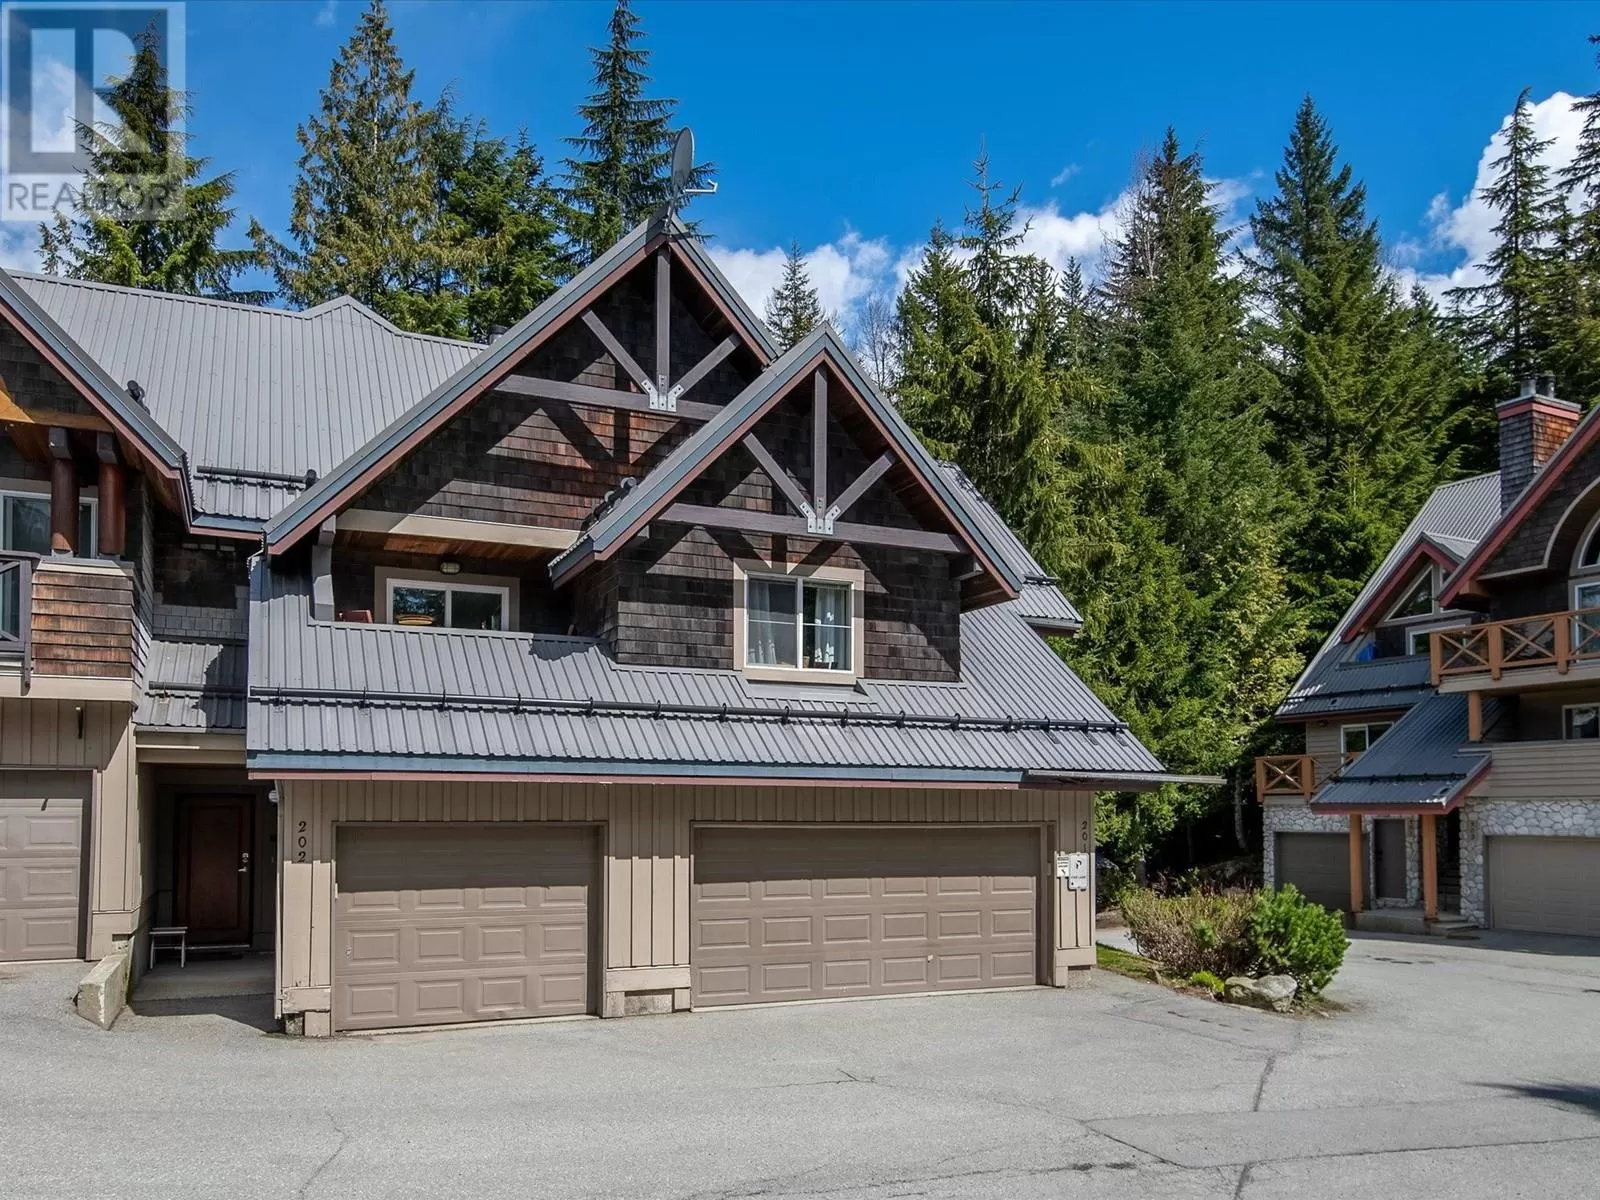 Row / Townhouse for rent: 202 2222 Castle Drive, Whistler, British Columbia V8E 0L7